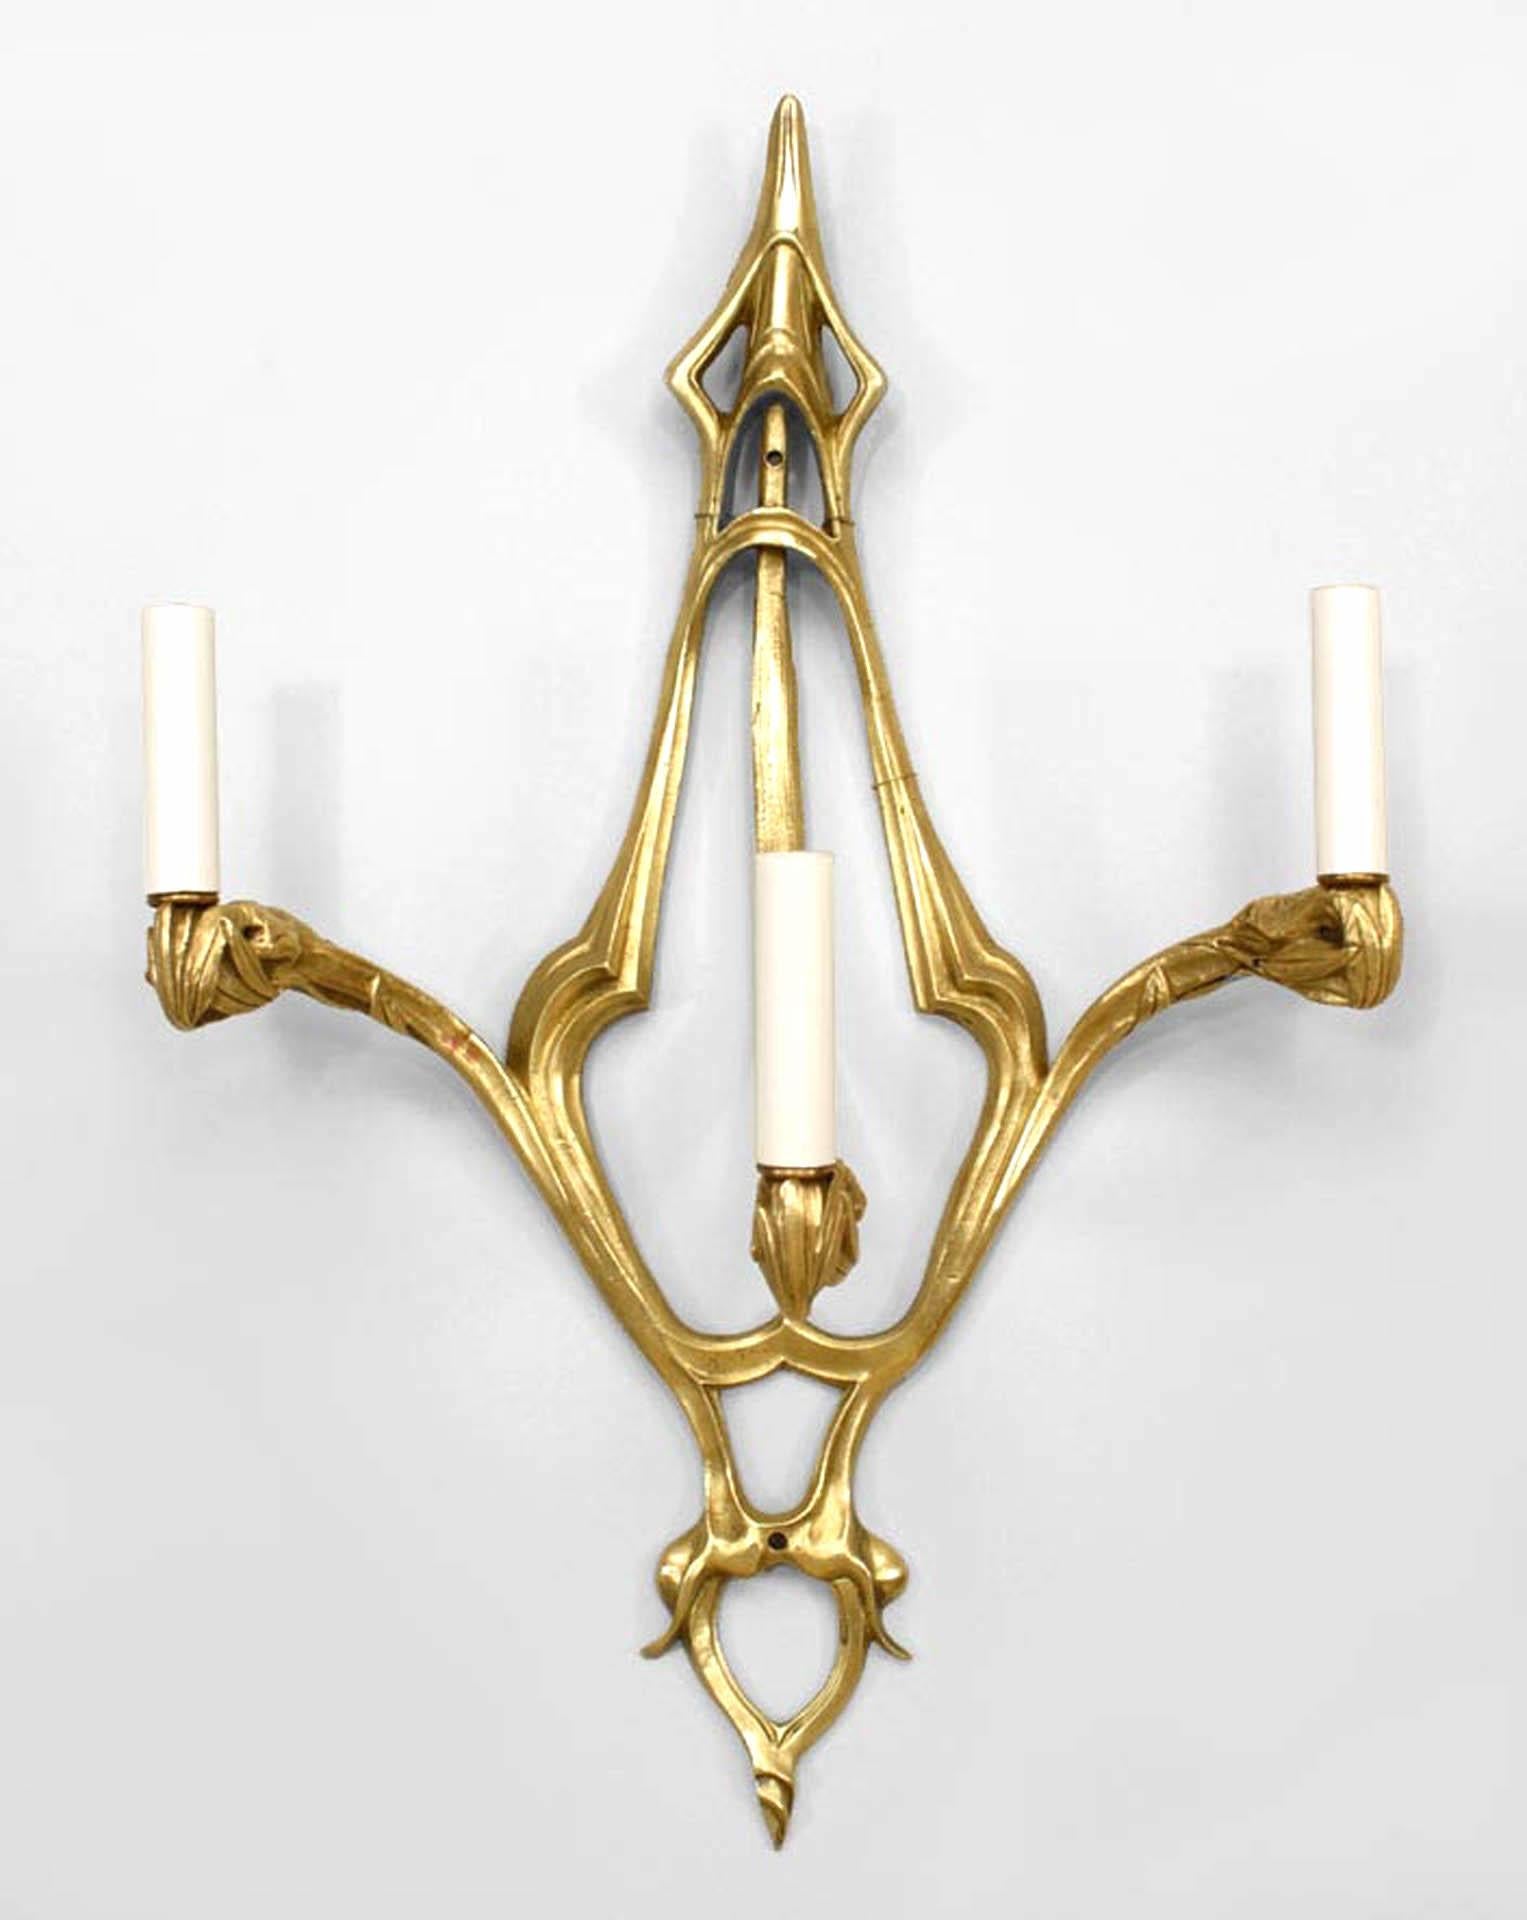 Pair of French Art Nouveau bronze dore wall sconces with thee arms and whiplash design.
